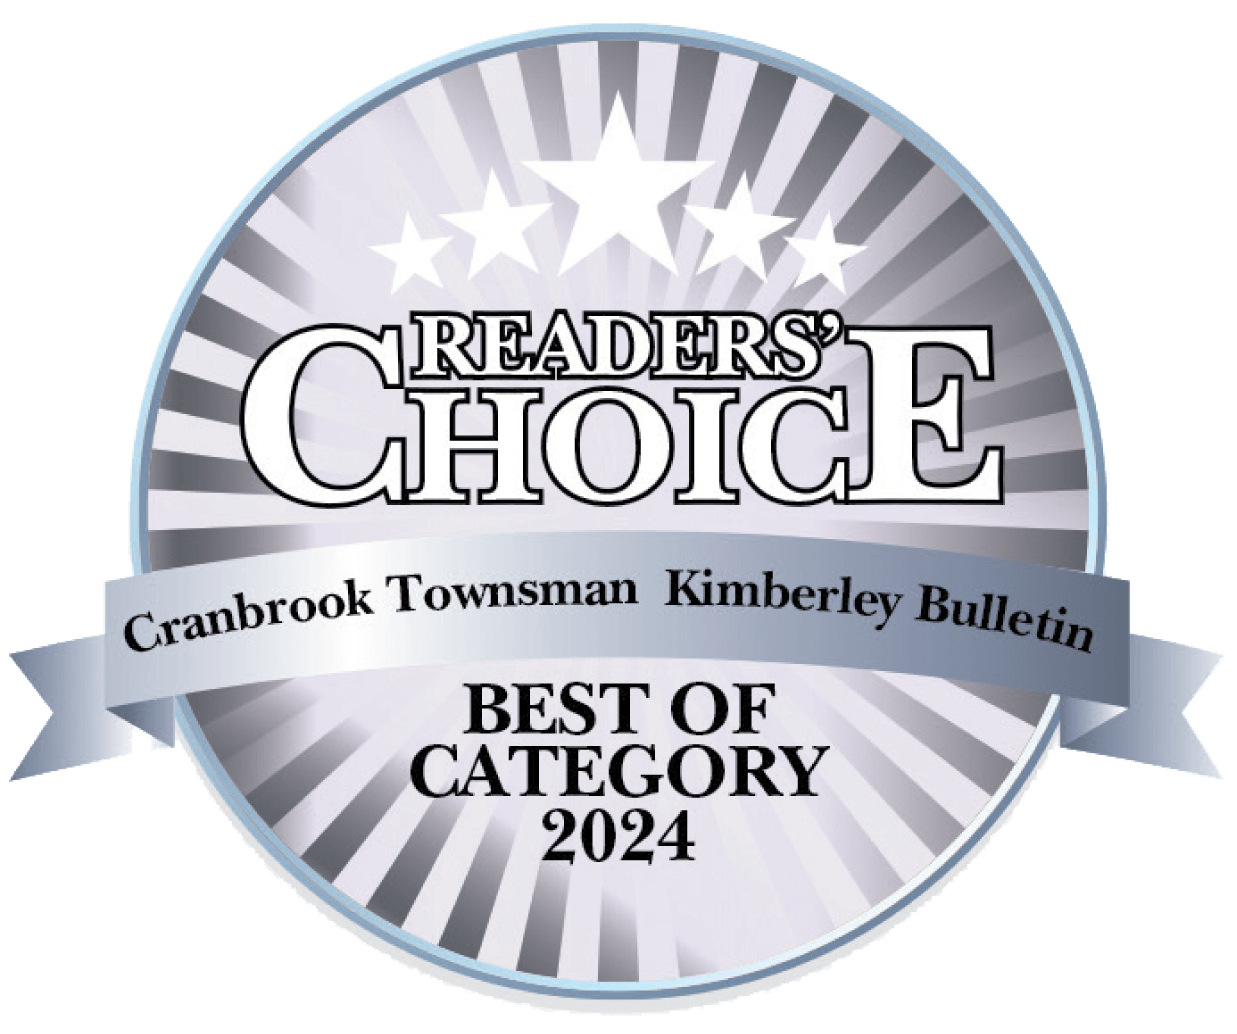 Reader's Choice - Best of Category 2024